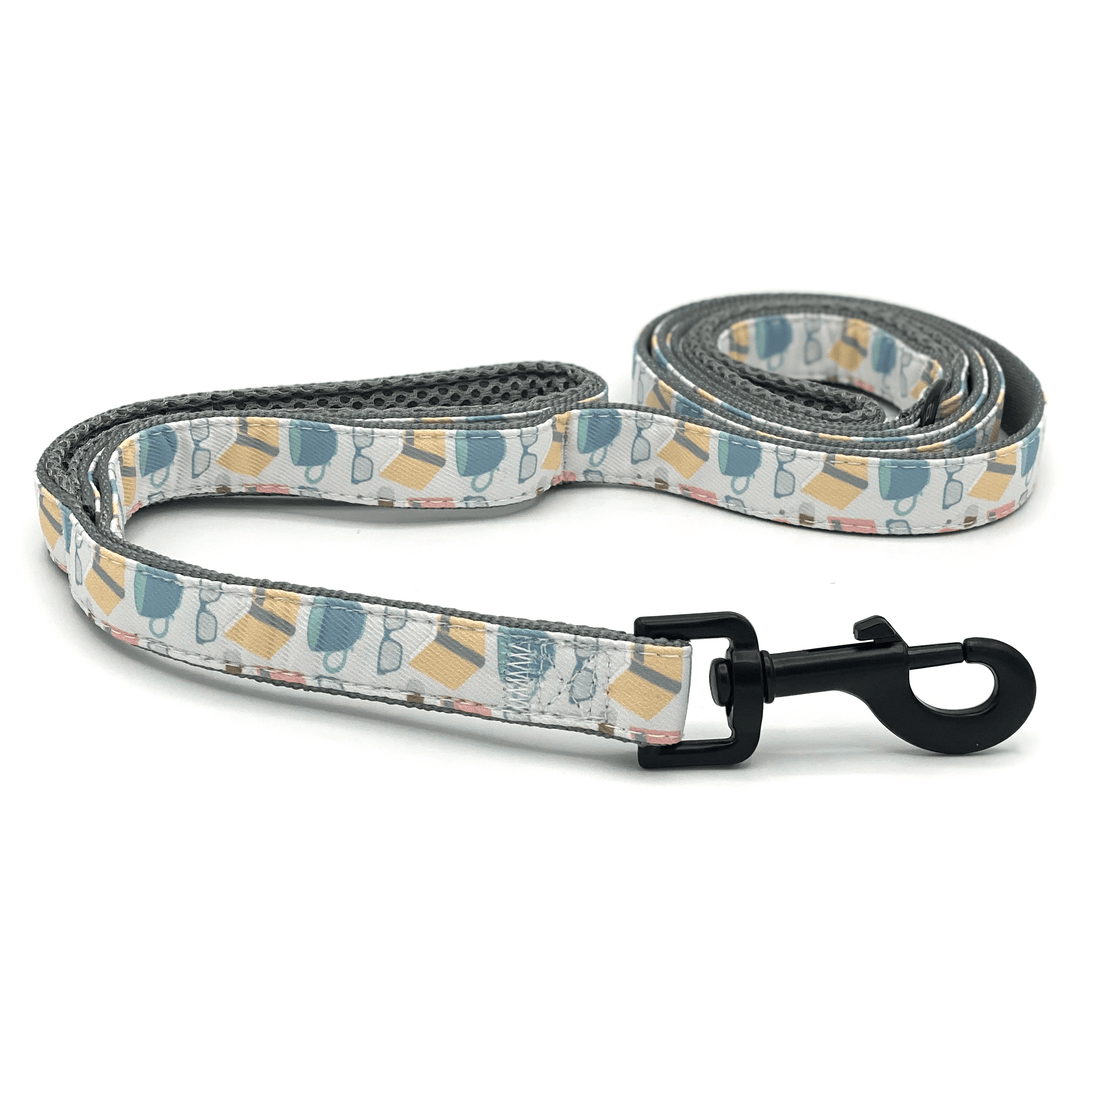 a dog leash with yellow books and blue coffee mugs